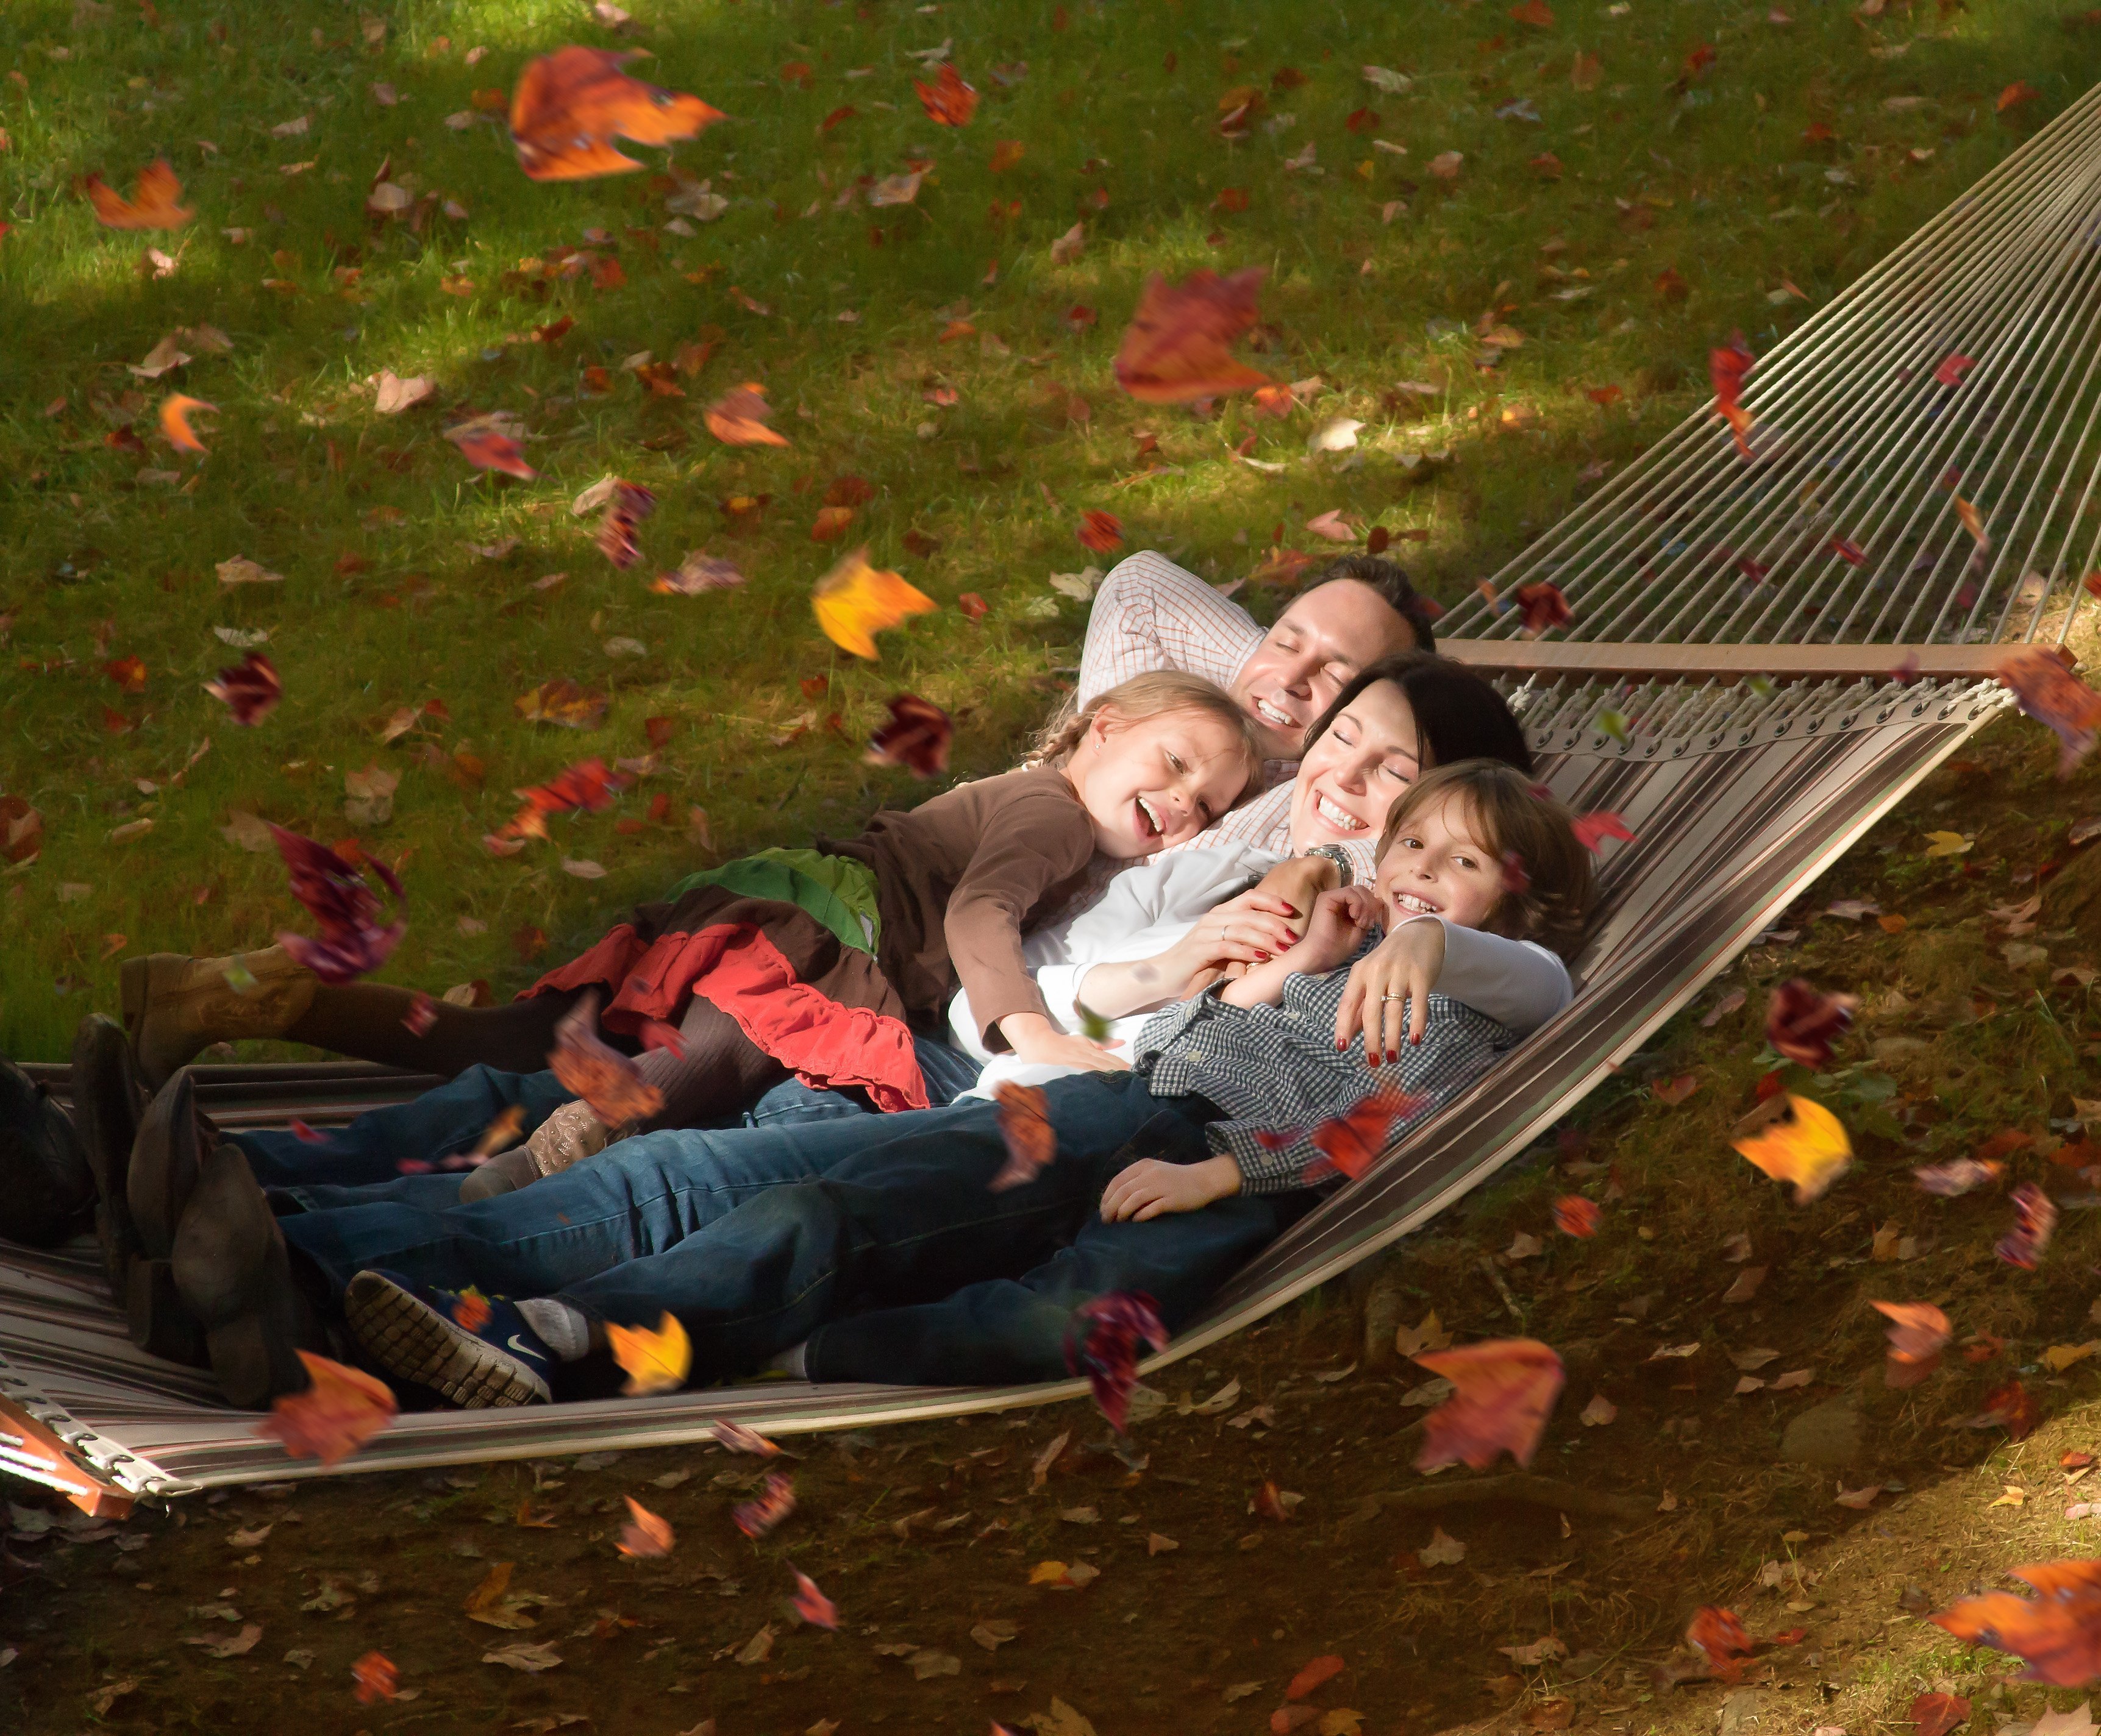 Mom, Dad and 2 kids laughing while swinging in a hammock with fall leaves swirling in the wind